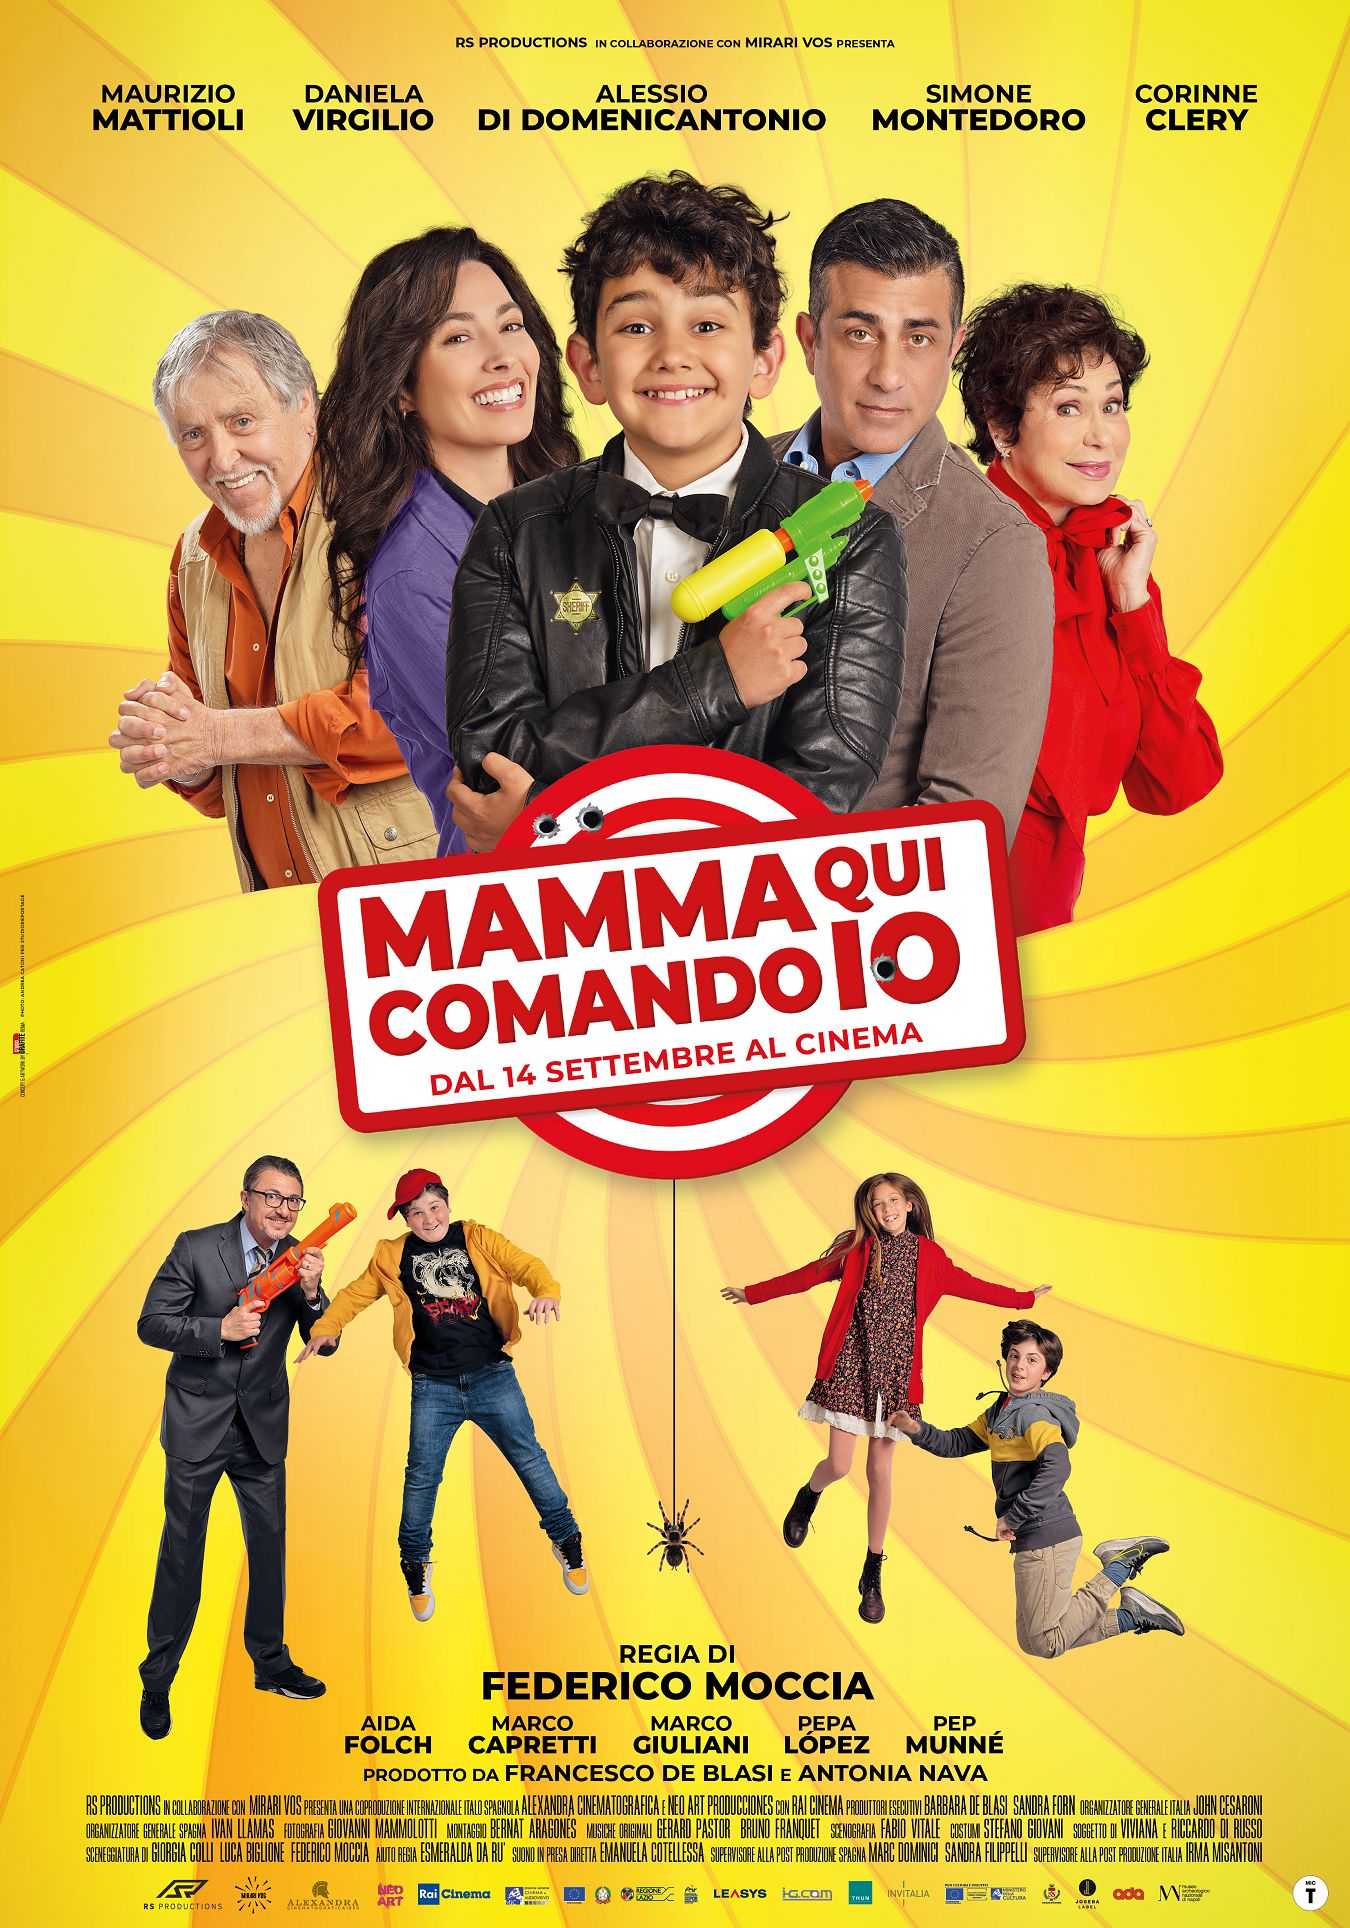 Mom here I'm in charge: the release date revealed in cinemas!